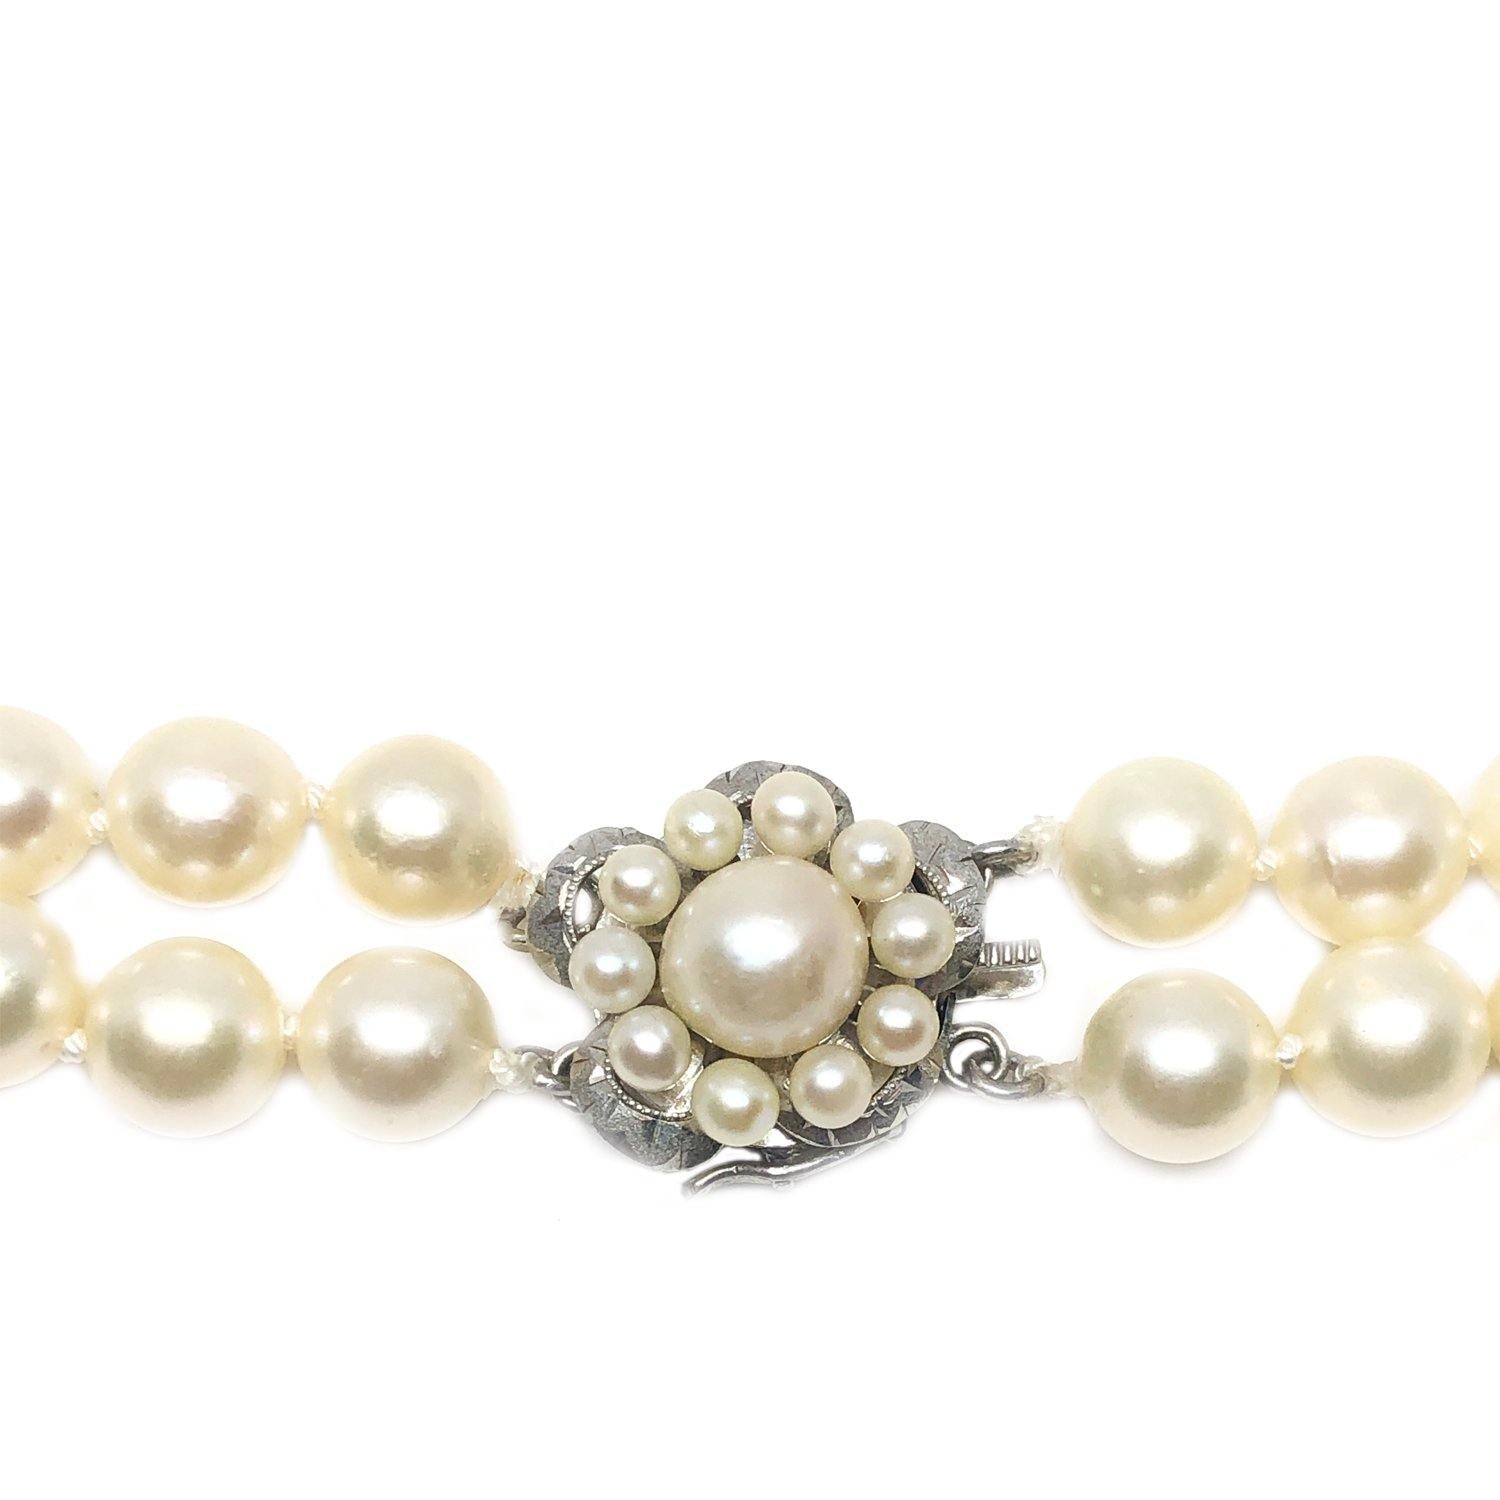 Floral Halo Japanese Saltwater Akoya Cultured Pearl Double Strand Necklace-Sterling Silver 15.50-17 Inch - Vintage Valuable Pearls